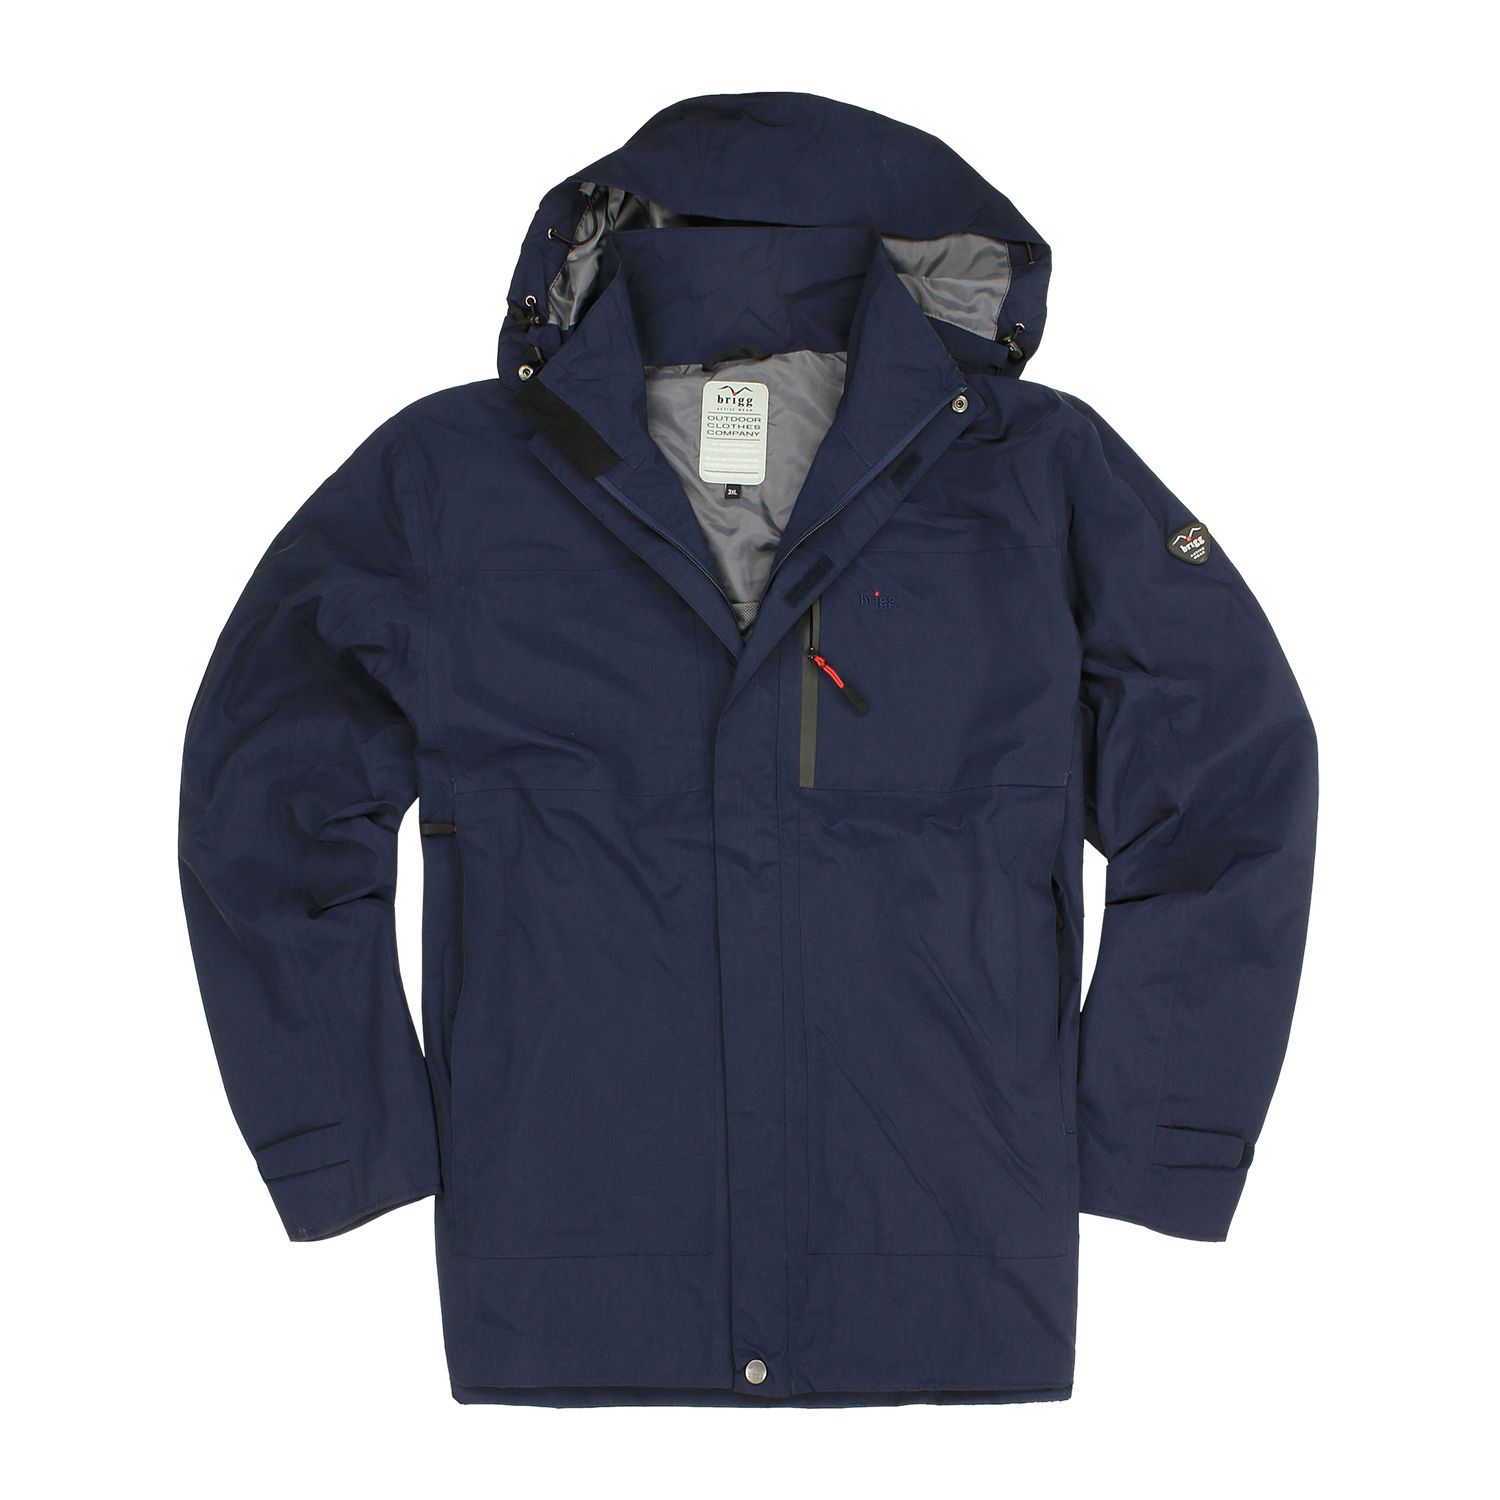 Lightweight functional jacket in navy by Brigg up to oversize 10XL